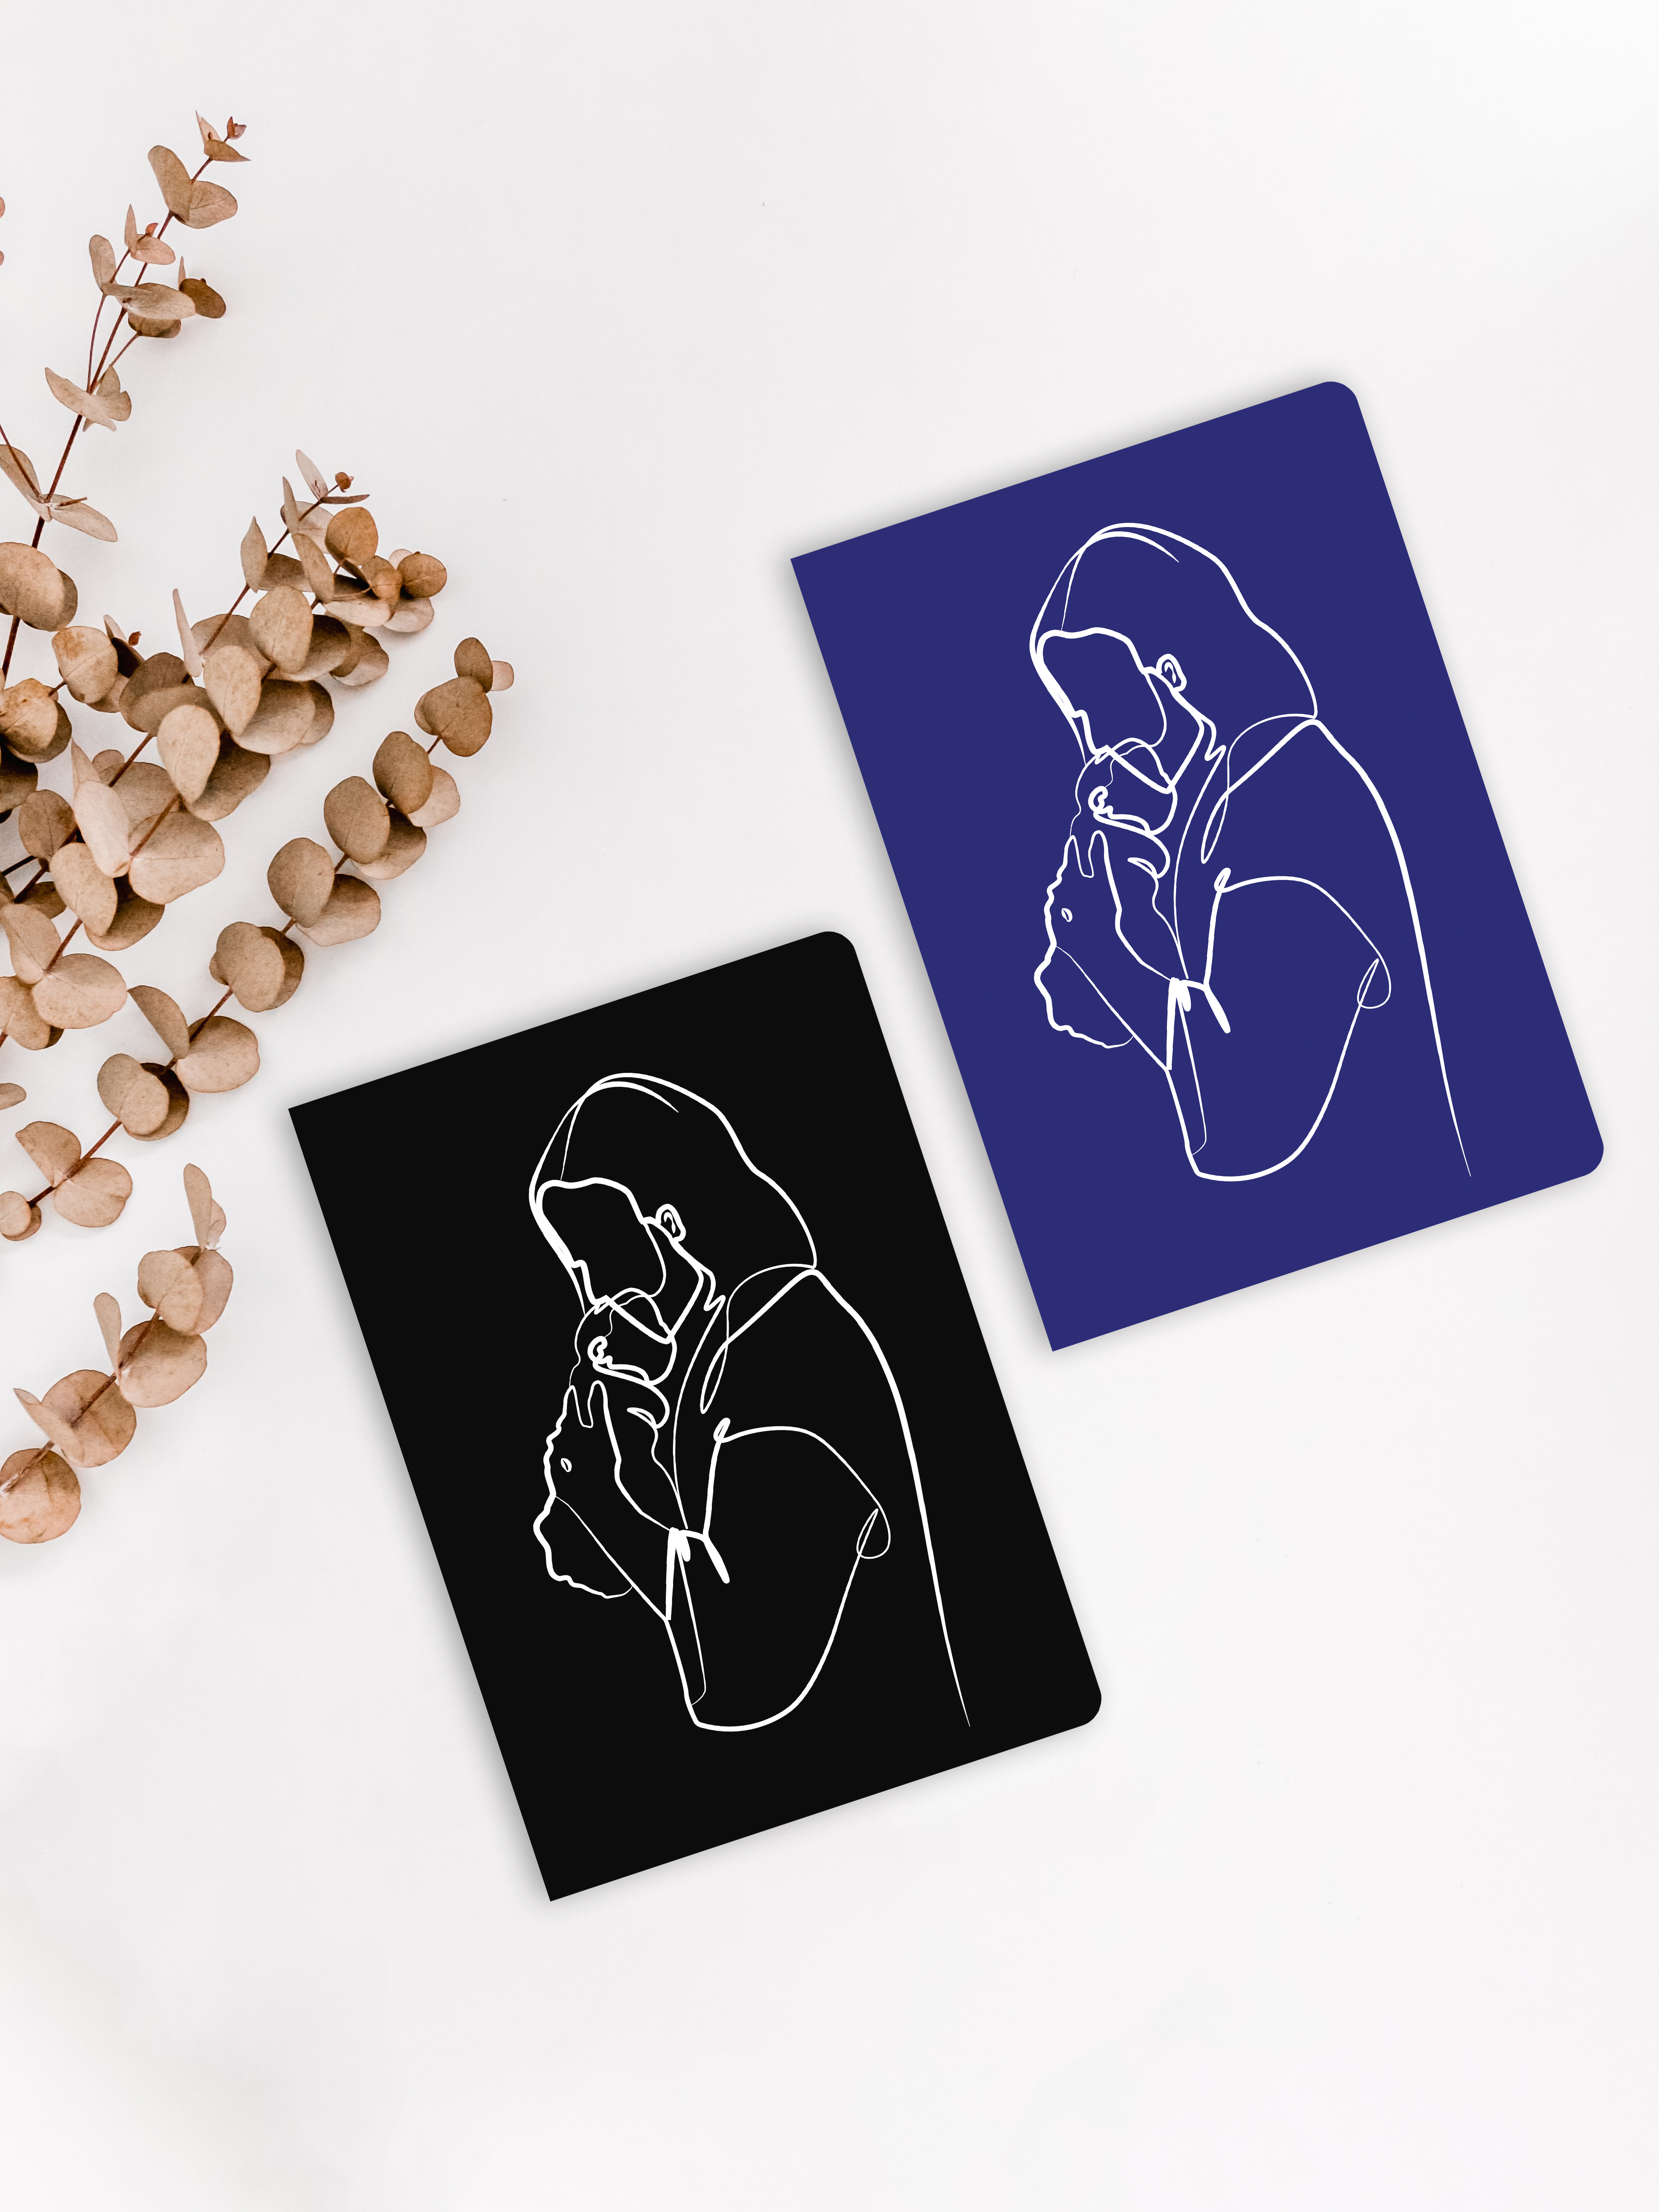 Christian Line Art design of Jesus holding a baby in His nail pierced hands, Child of God Design, A5 Christian Journals in Royal Blue and Matte Black by 4319.CO